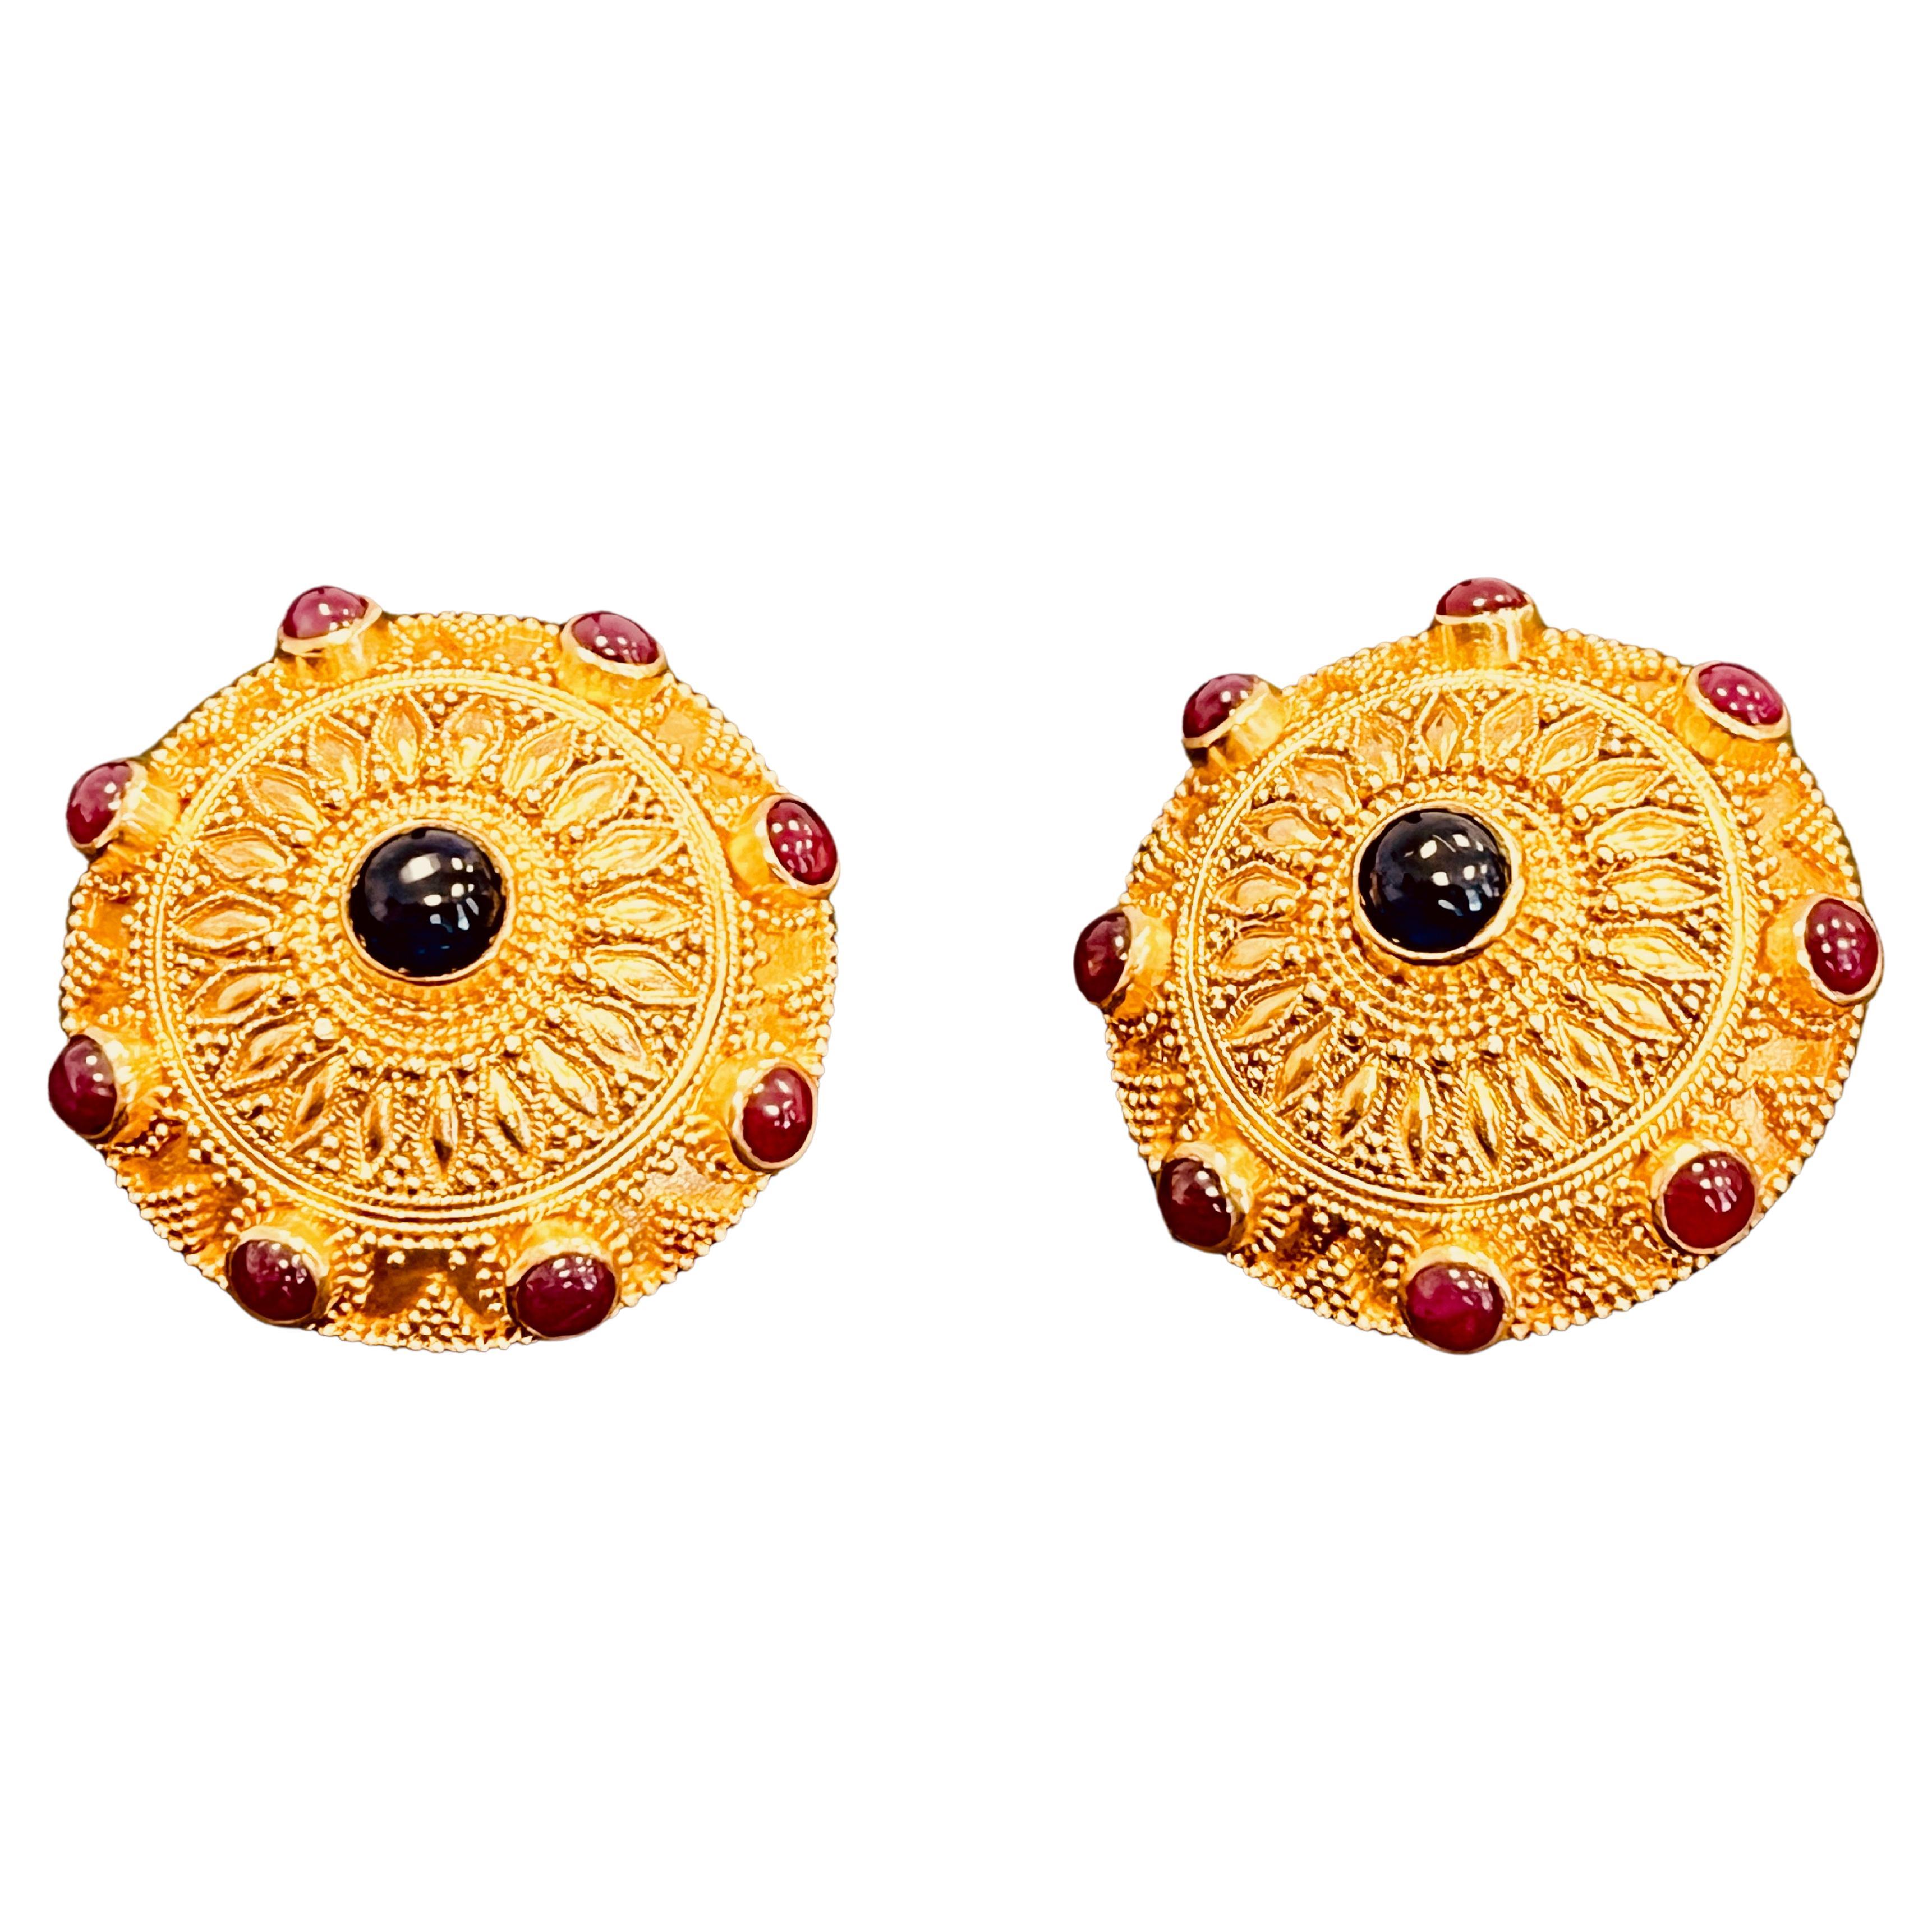 22ct Gold Byzantine Inspired Ear Clips Studded With Cabochon Sapphire and Ruby For Sale 2